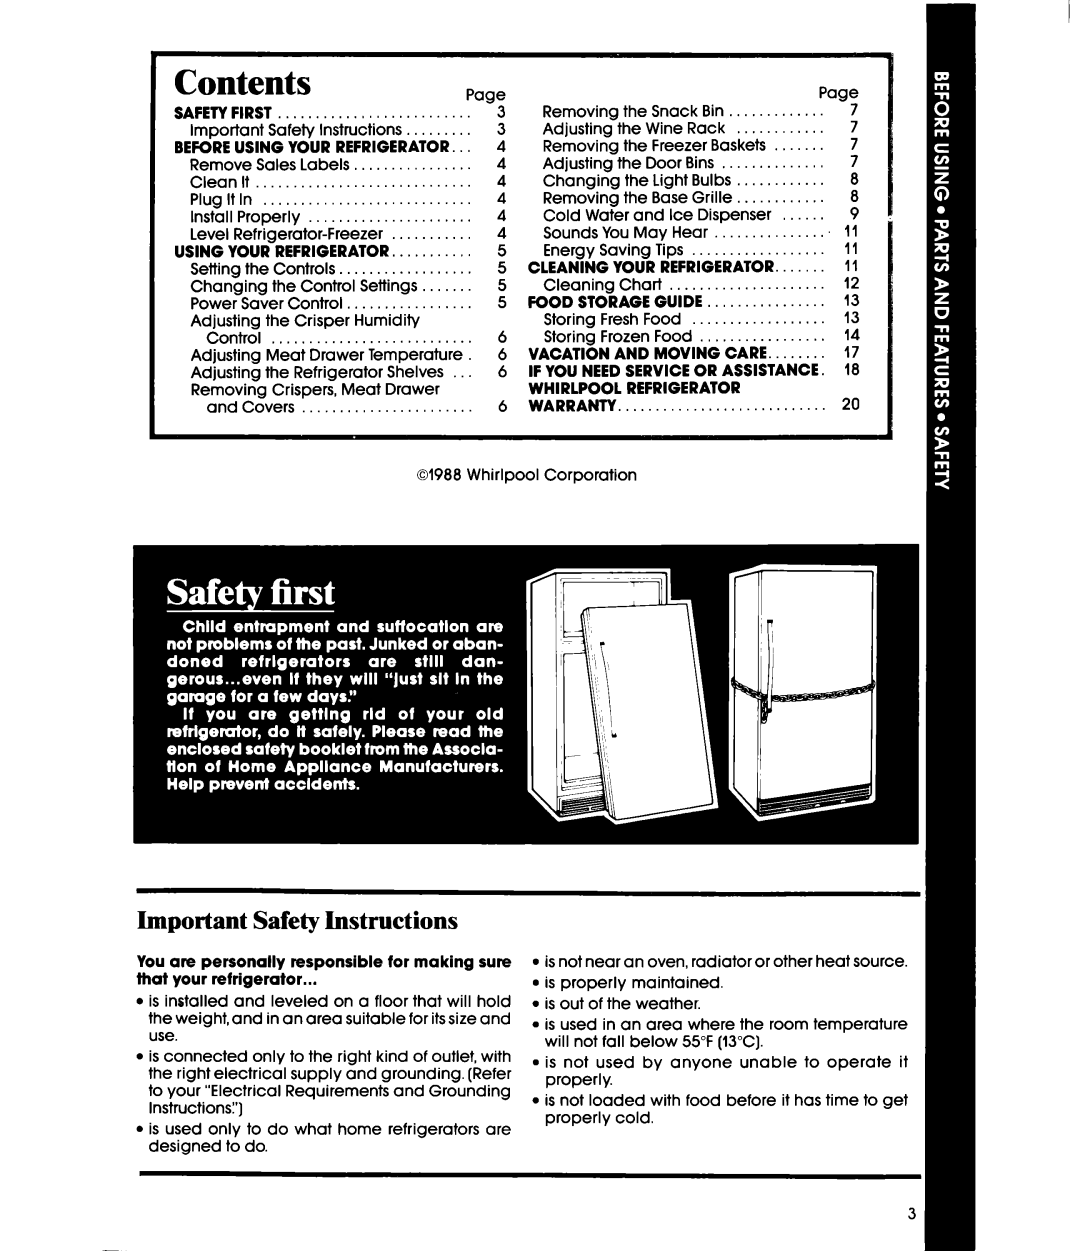 Whirlpool ED25DW manual Contents, Important Safety Instructions 